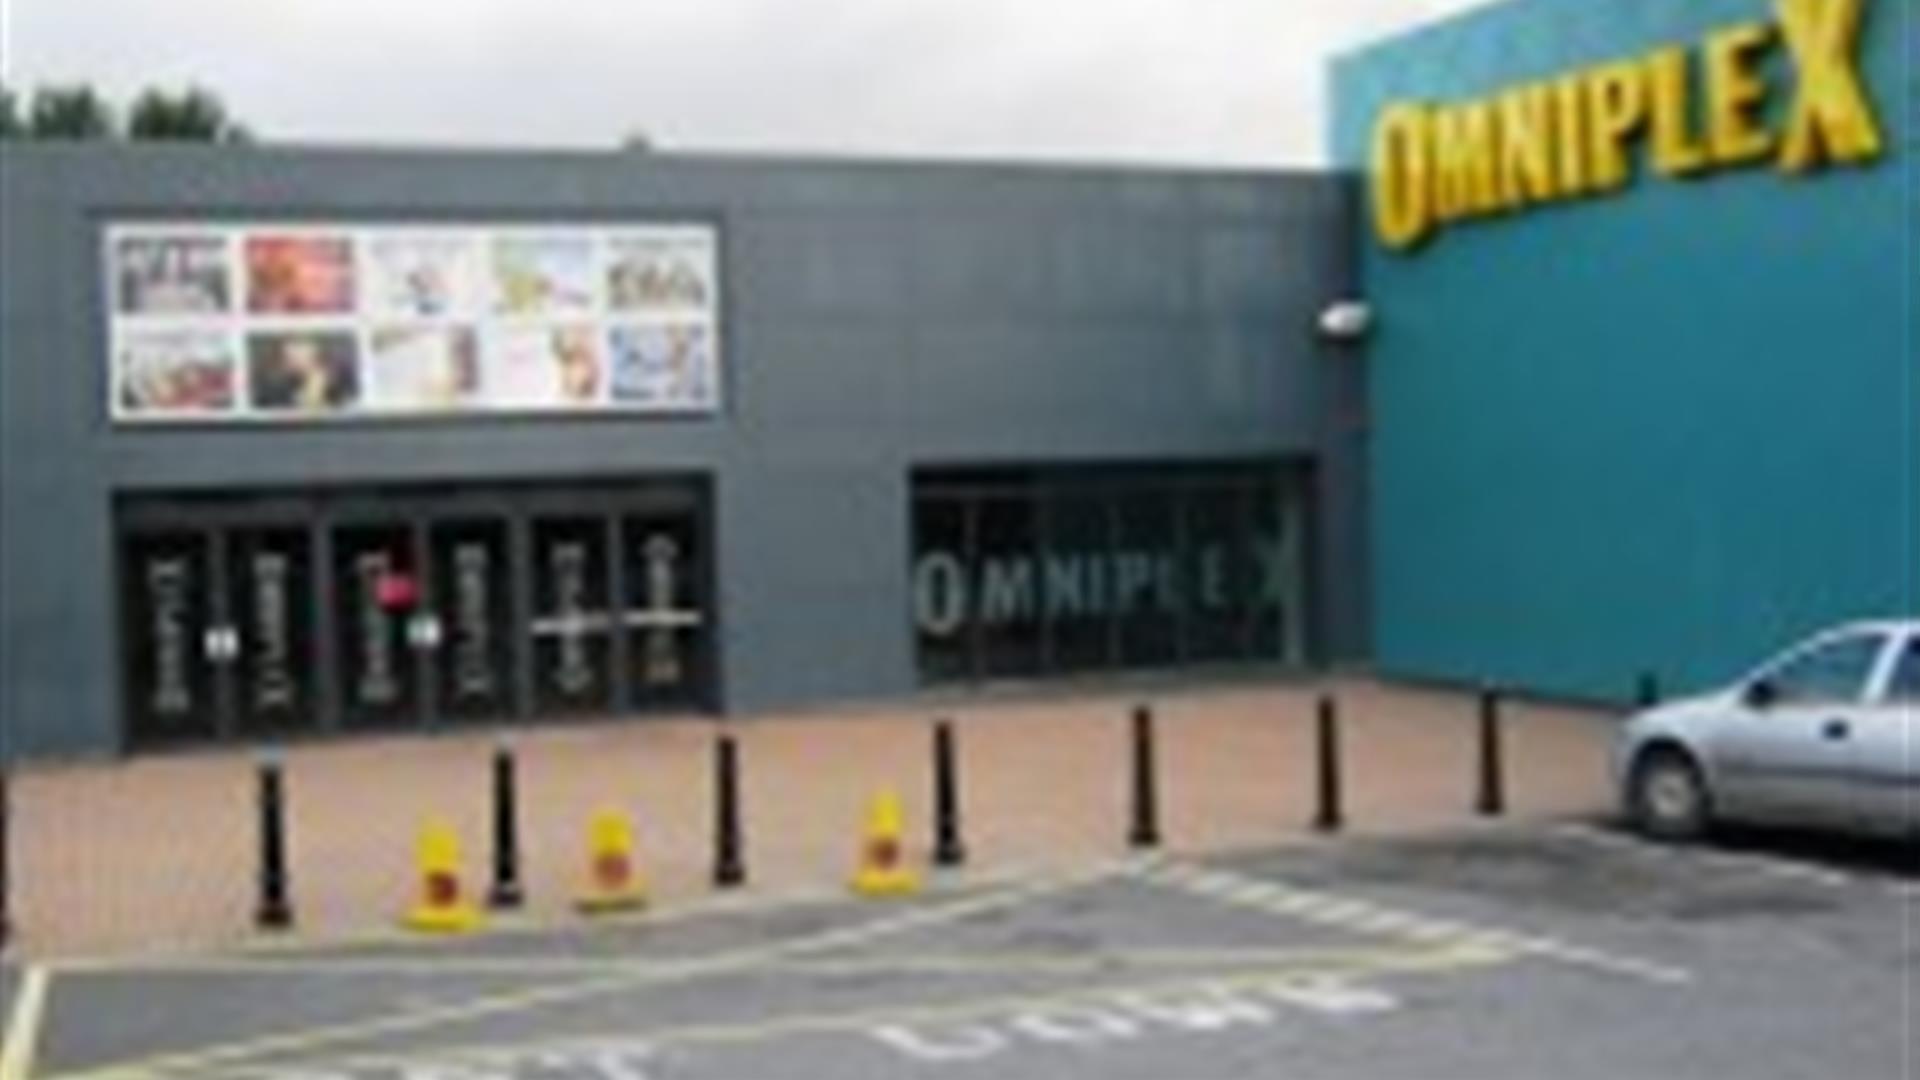 Image of the front entrance to the Omniplex